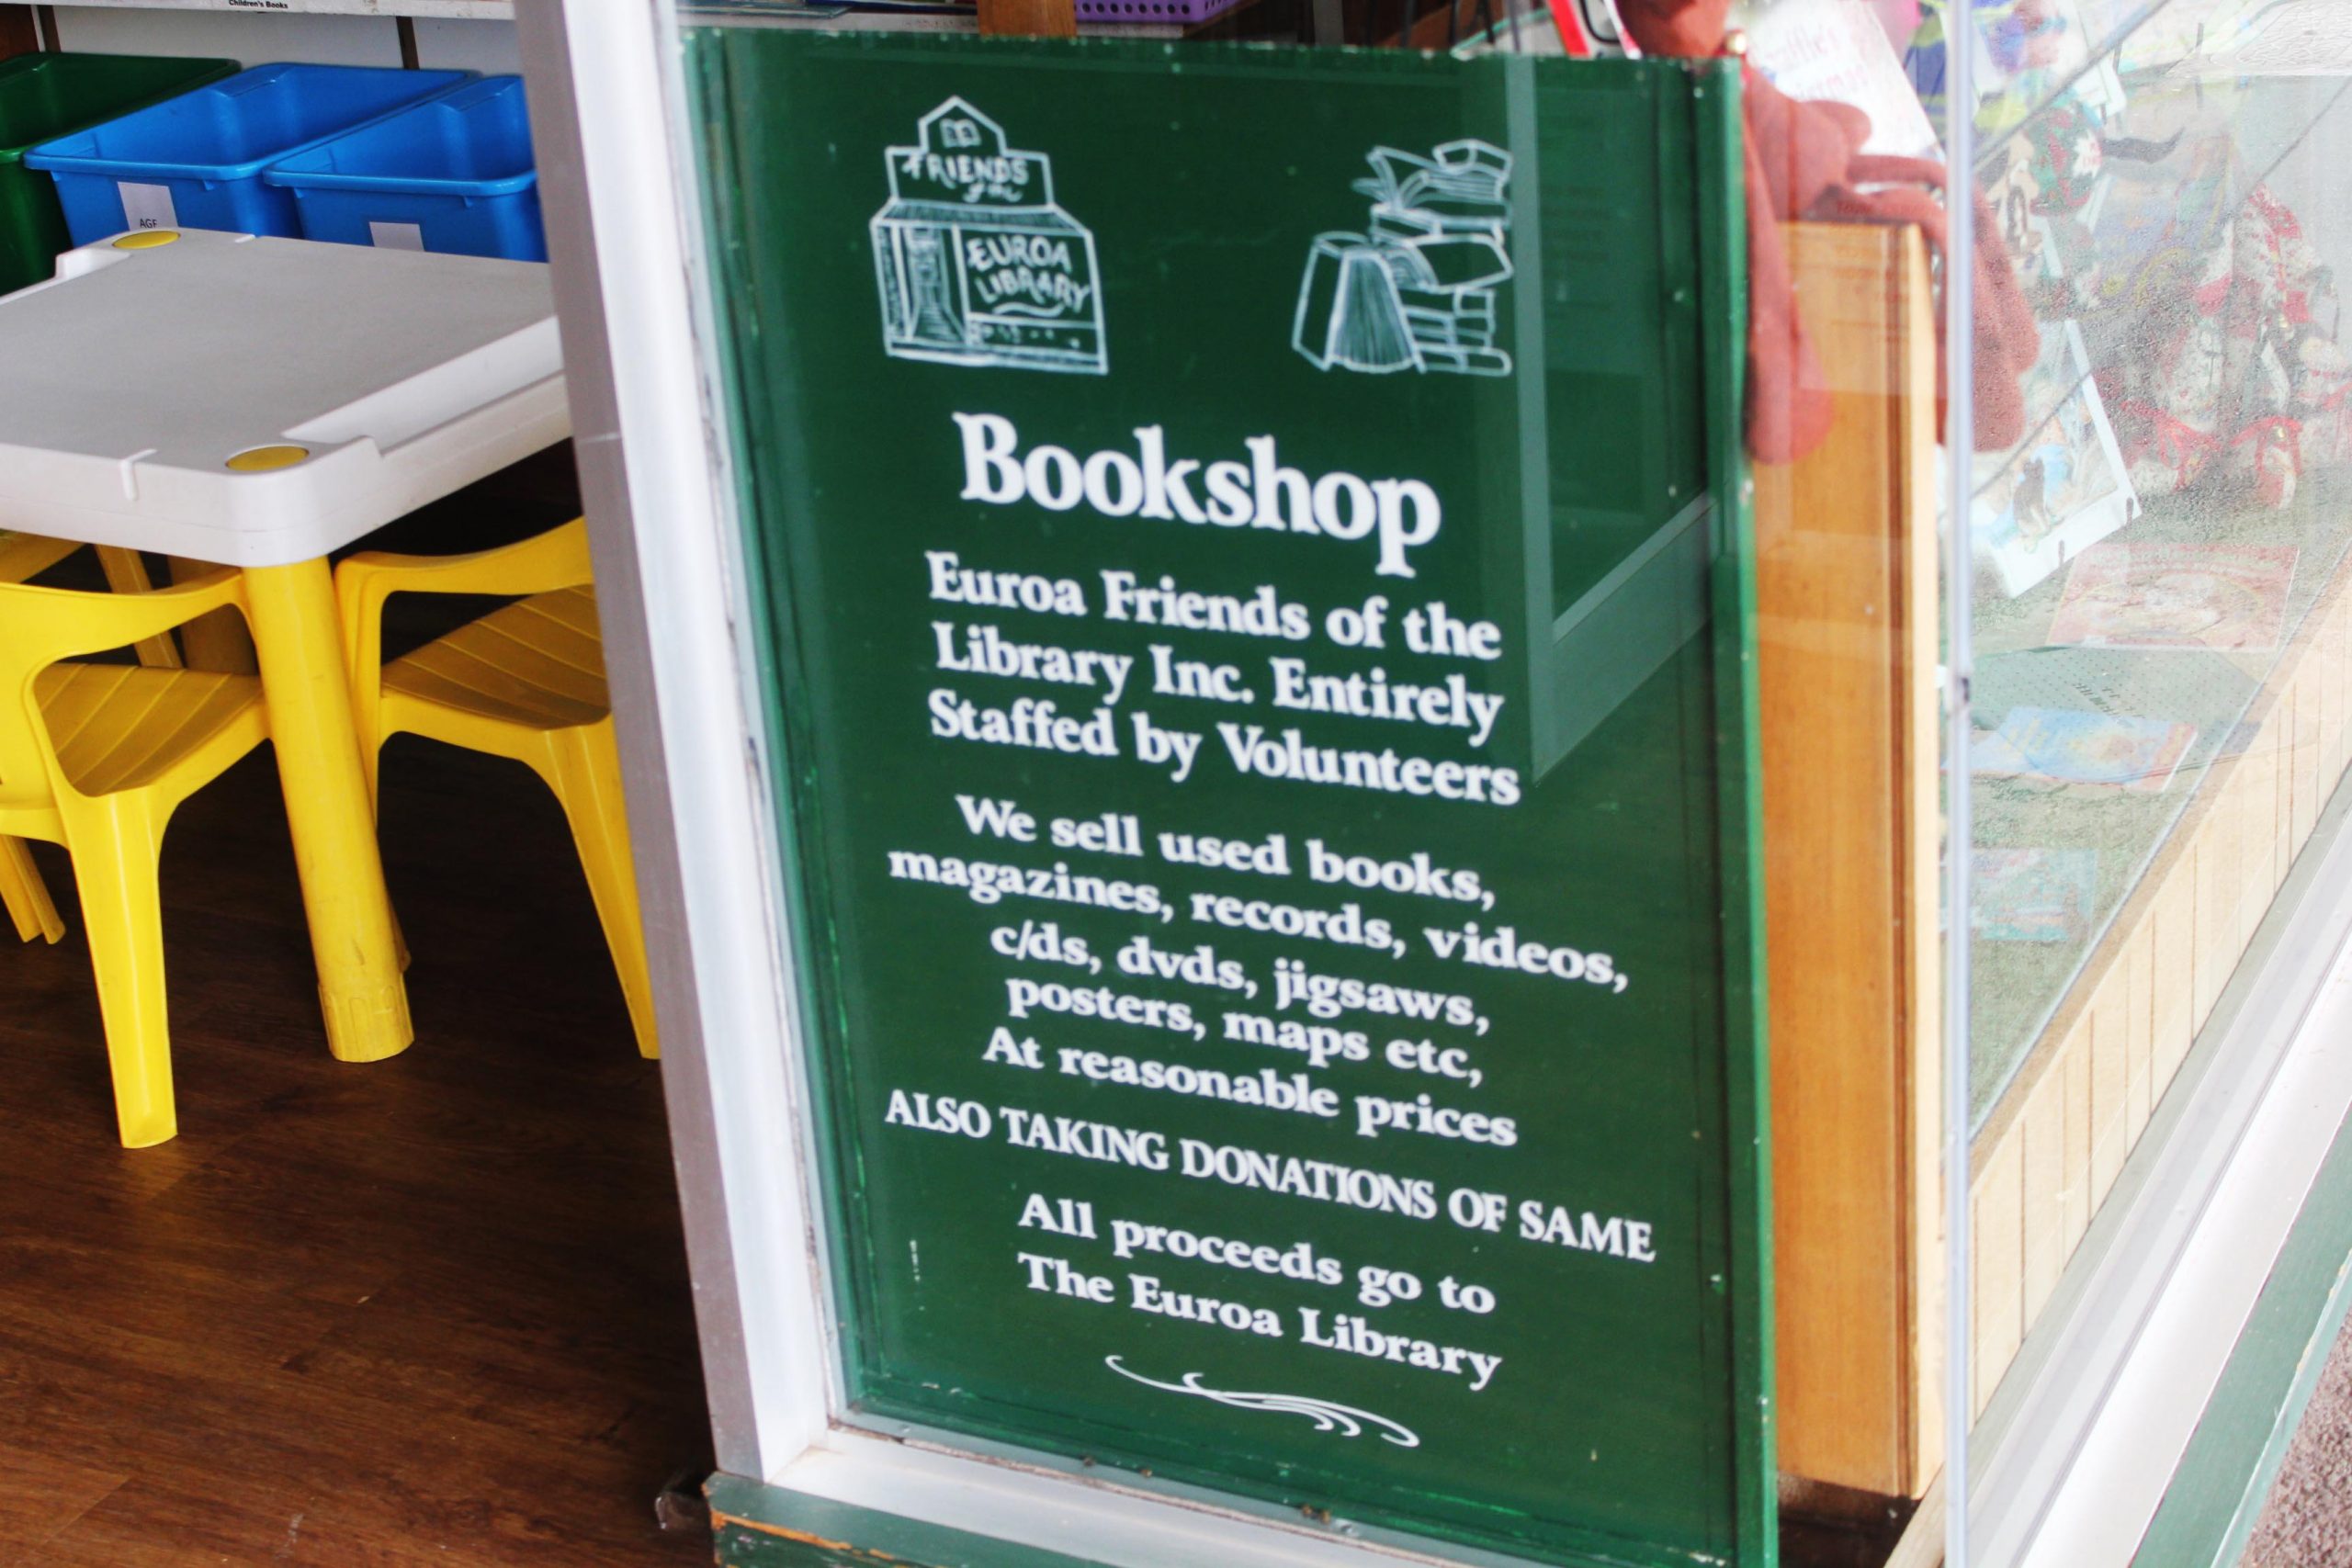 Euroa community bookshop with sign saying it is run by volunteers.